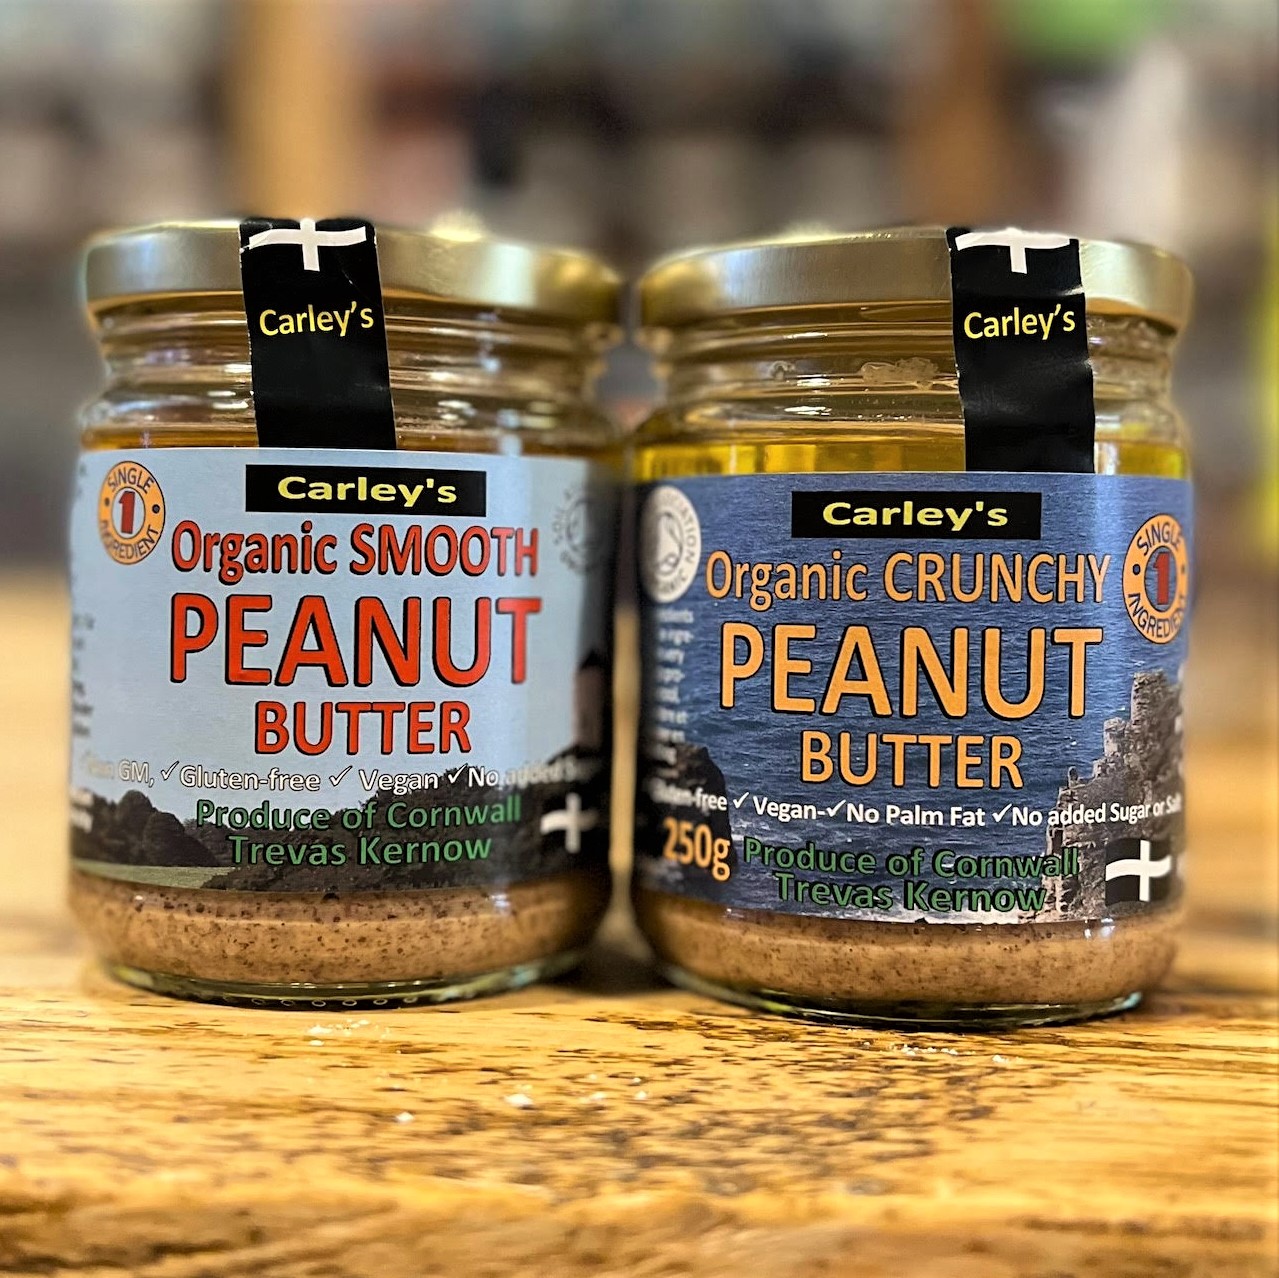 Peanut Butter, 250g (Organic) by Carley's (Smooth or Crunchy)